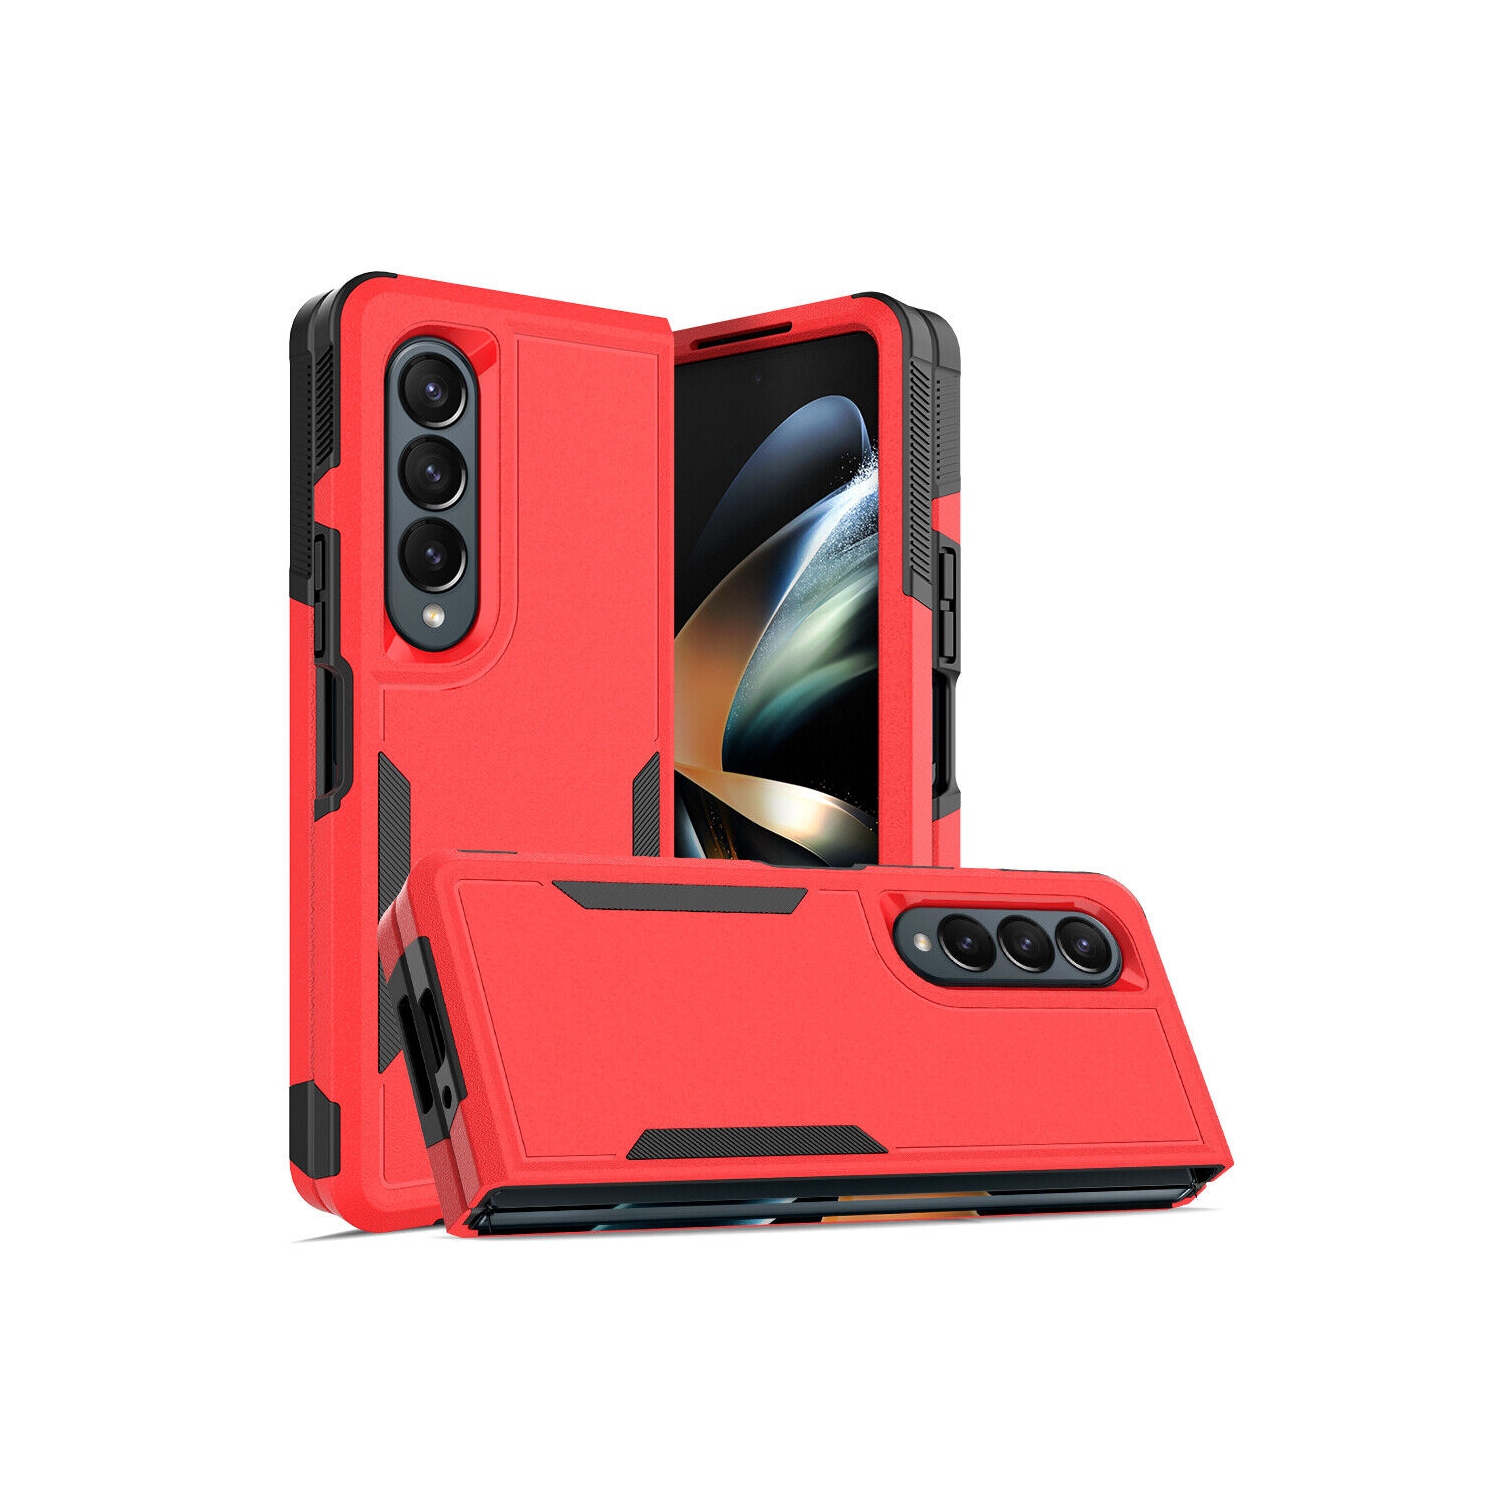 【CSmart】 Dual Layers Heavy Duty Rubber Armor Bumper Hard Case Cover for Samsung Galaxy Z Fold 4 5G, Red